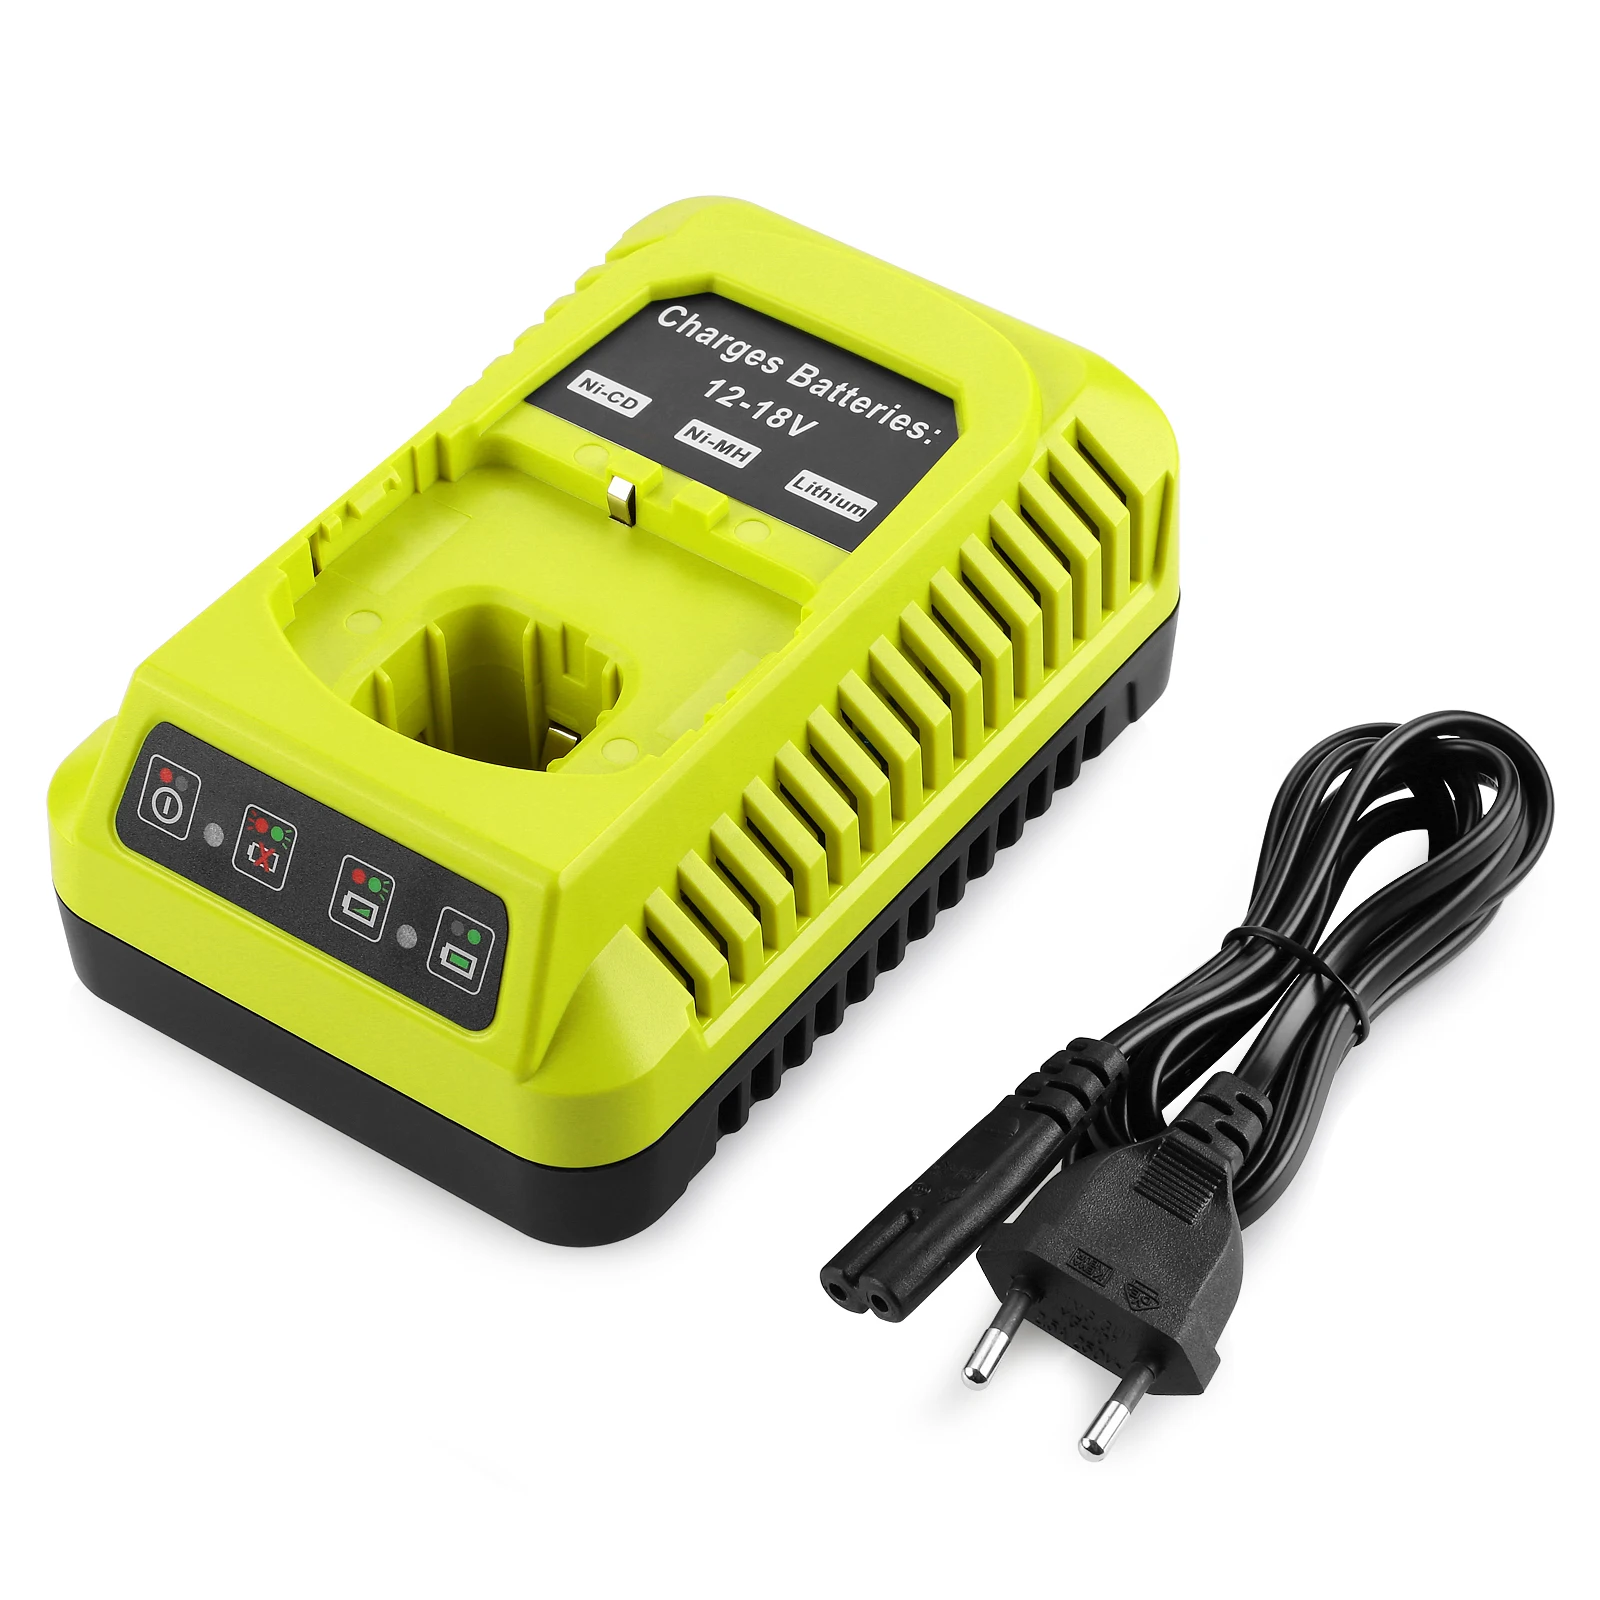 

3A Battery Charger for Ryobi Battery P108 One Plus Ni-CD Ni-Mh & Li-ion 12V to 18V battery charger, Green